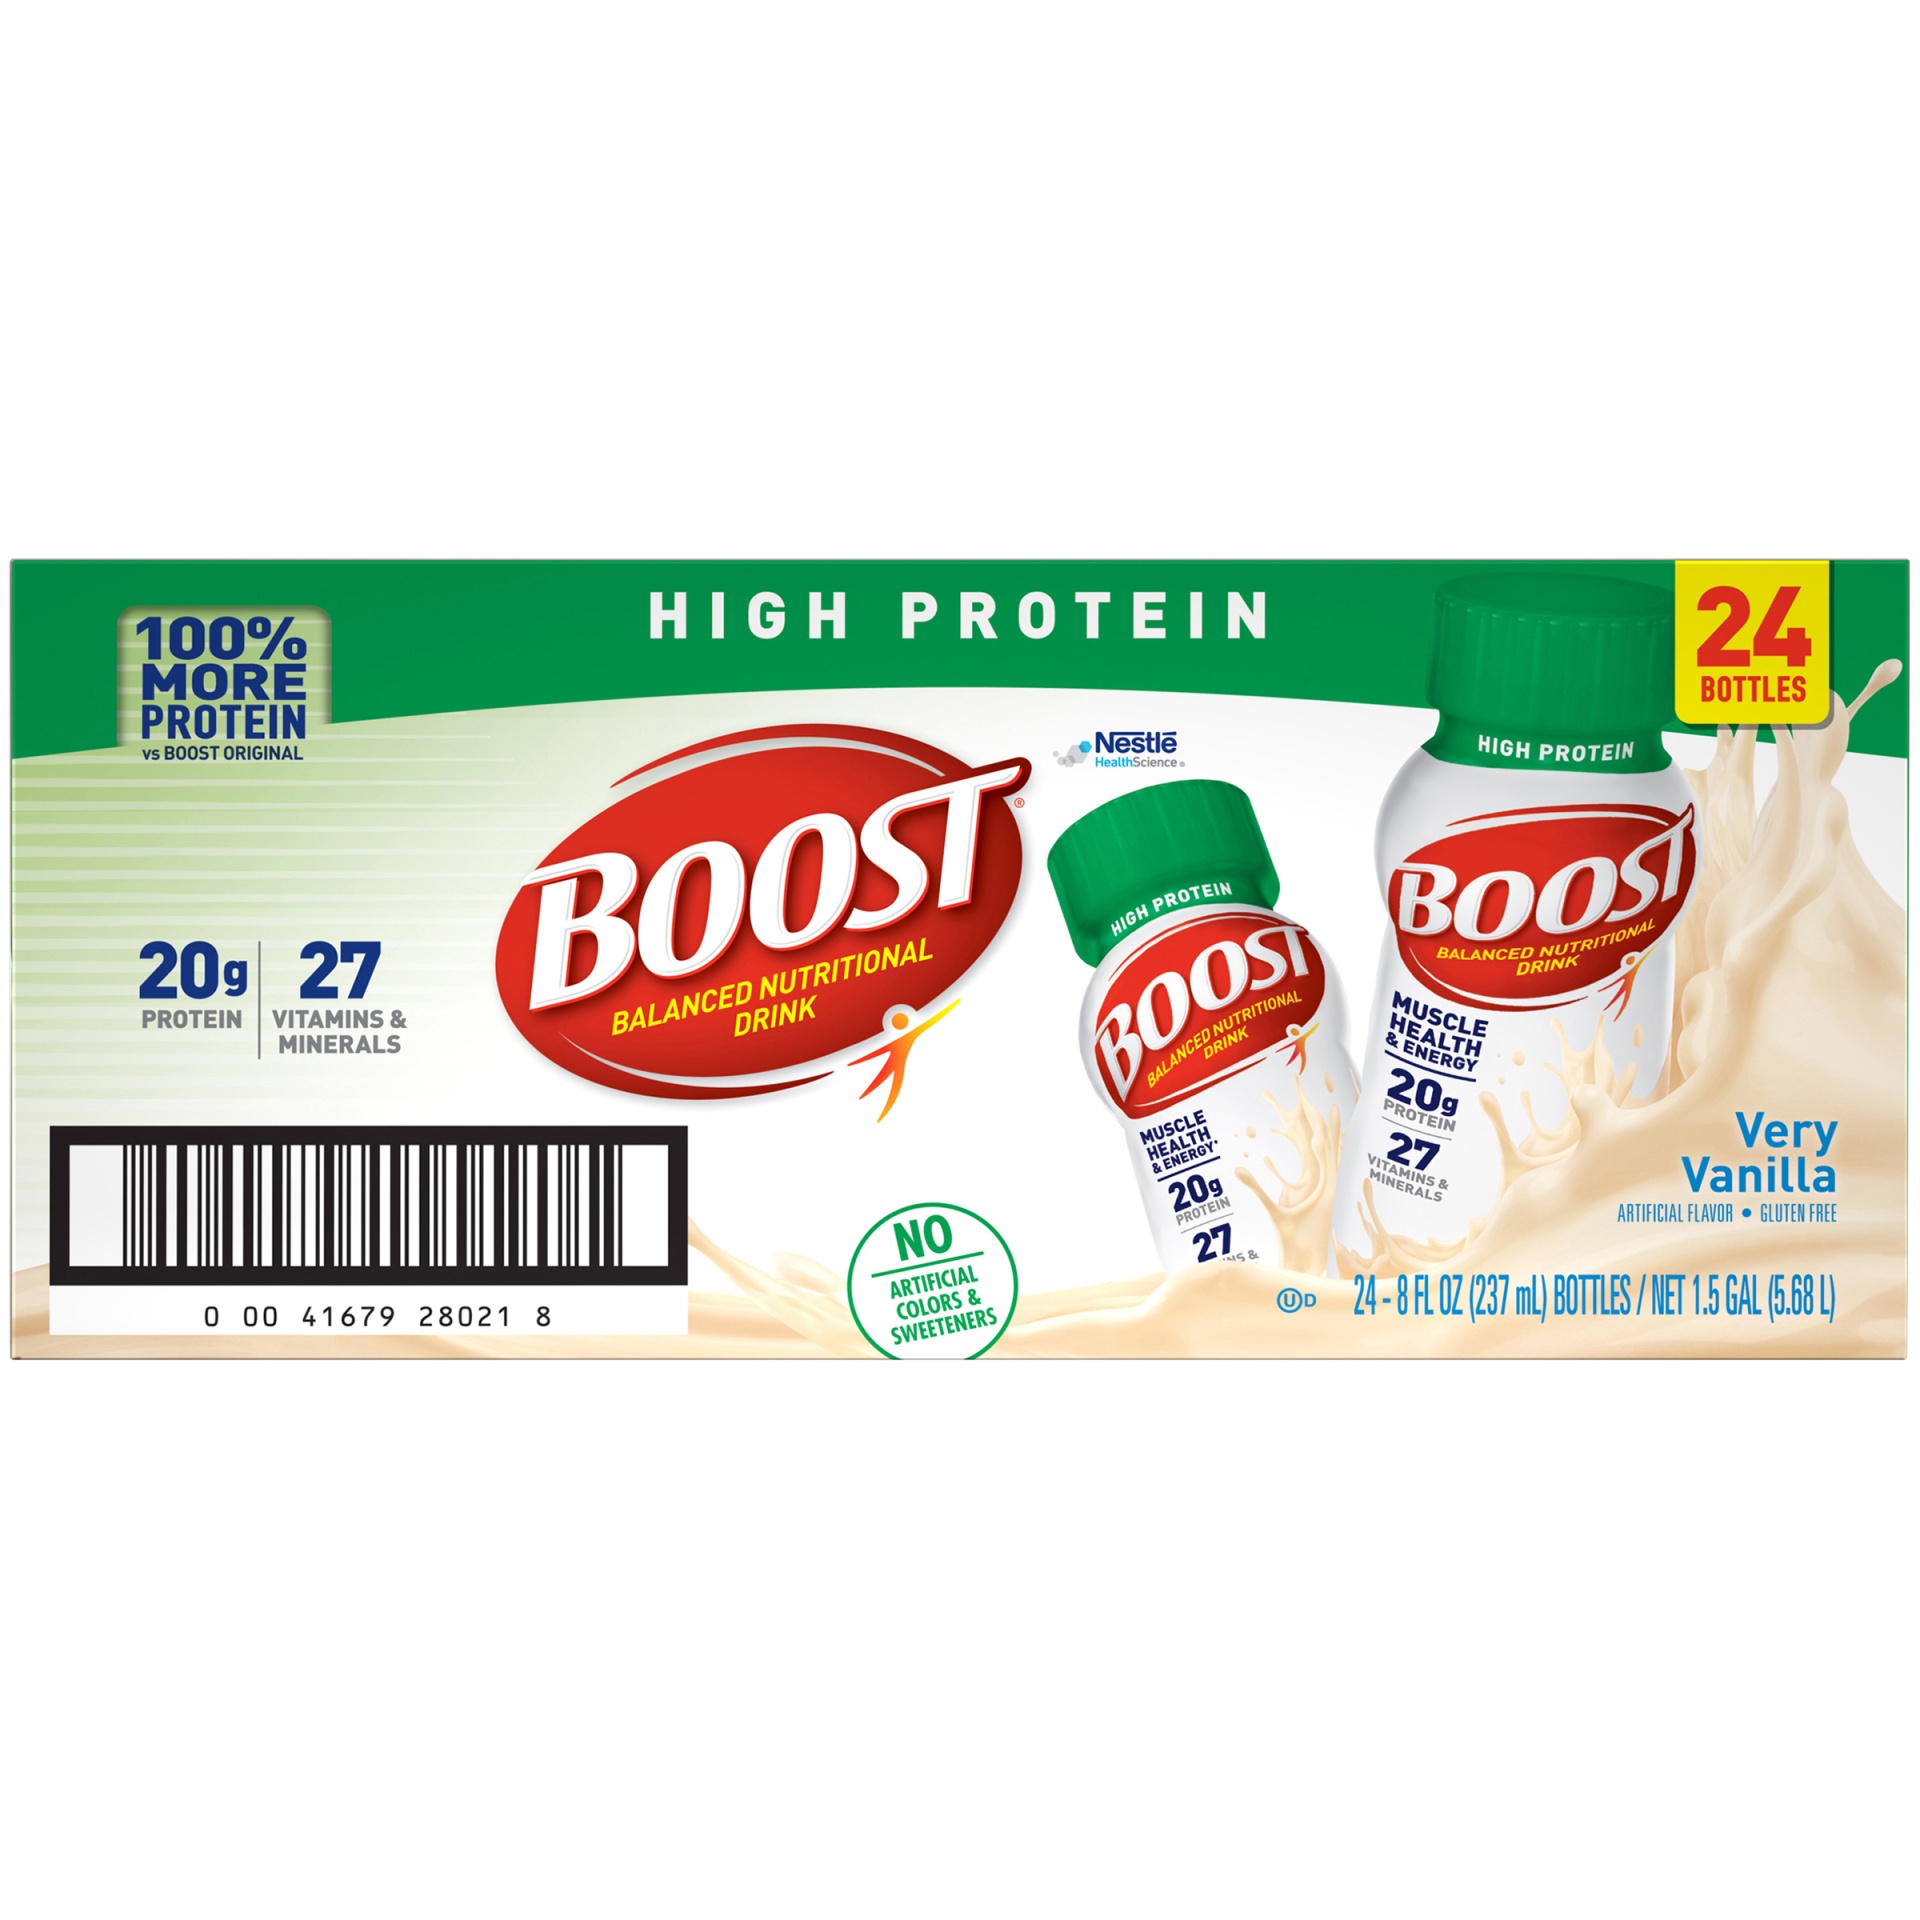 slide 6 of 8, Boost Very Vanilla High Protein Complete Nutritional Drink, 6 ct; 8 oz